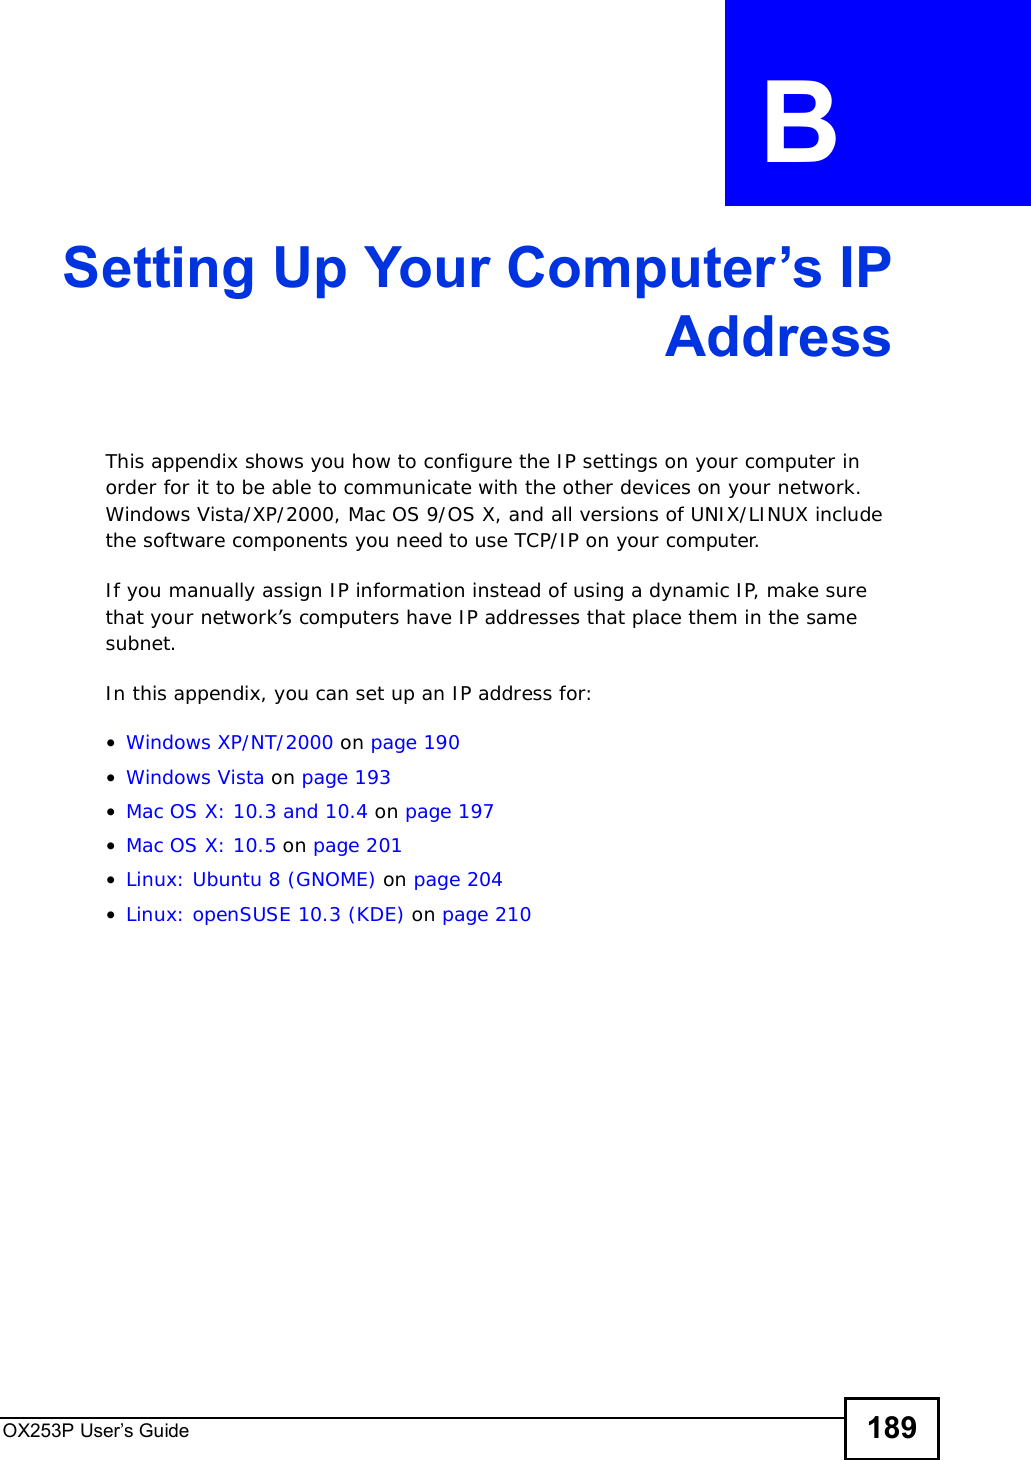 OX253P User’s Guide 189APPENDIX  B Setting Up Your Computer’s IPAddressThis appendix shows you how to configure the IP settings on your computer in order for it to be able to communicate with the other devices on your network. Windows Vista/XP/2000, Mac OS 9/OS X, and all versions of UNIX/LINUX include the software components you need to use TCP/IP on your computer. If you manually assign IP information instead of using a dynamic IP, make sure that your network’s computers have IP addresses that place them in the same subnet.In this appendix, you can set up an IP address for:•Windows XP/NT/2000 on page190•Windows Vista on page193•Mac OS X: 10.3 and 10.4 on page197•Mac OS X: 10.5 on page201•Linux: Ubuntu 8 (GNOME) on page 204•Linux: openSUSE 10.3 (KDE) on page210